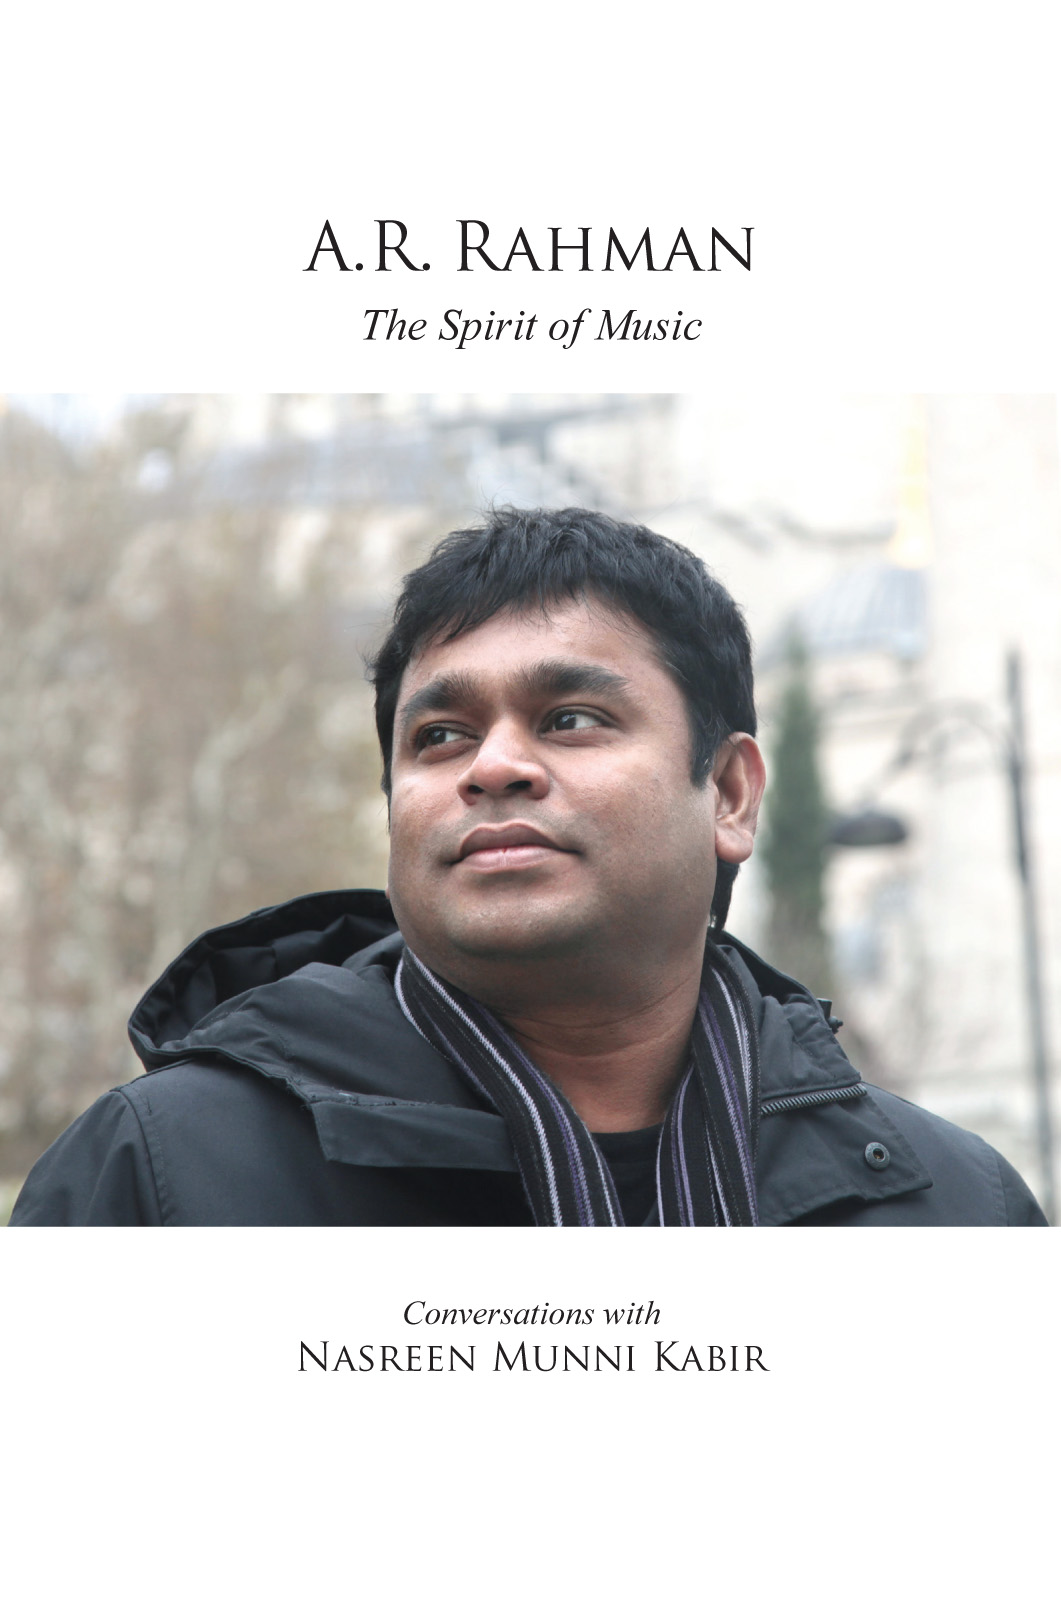 The Spirit of Music book launch | Picture 38155